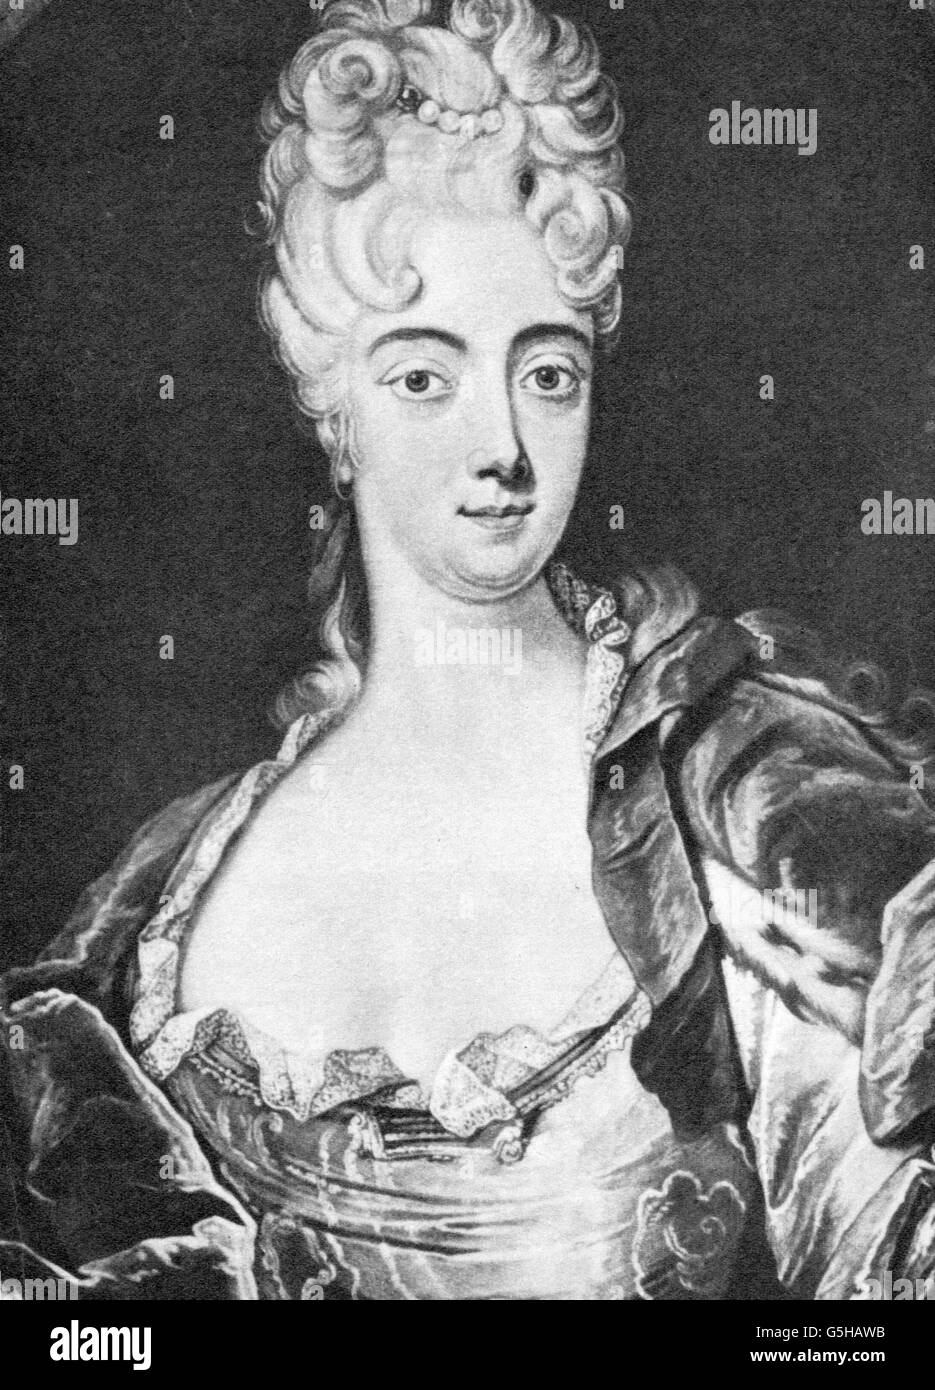 Cosel, Anna Constantia countess of, 17.10.1680 - 31.3.1765, mistress of elector Frederick August I of Saxony 1705 - 1713, half length, after painting, 18th century, Artist's Copyright has not to be cleared Stock Photo